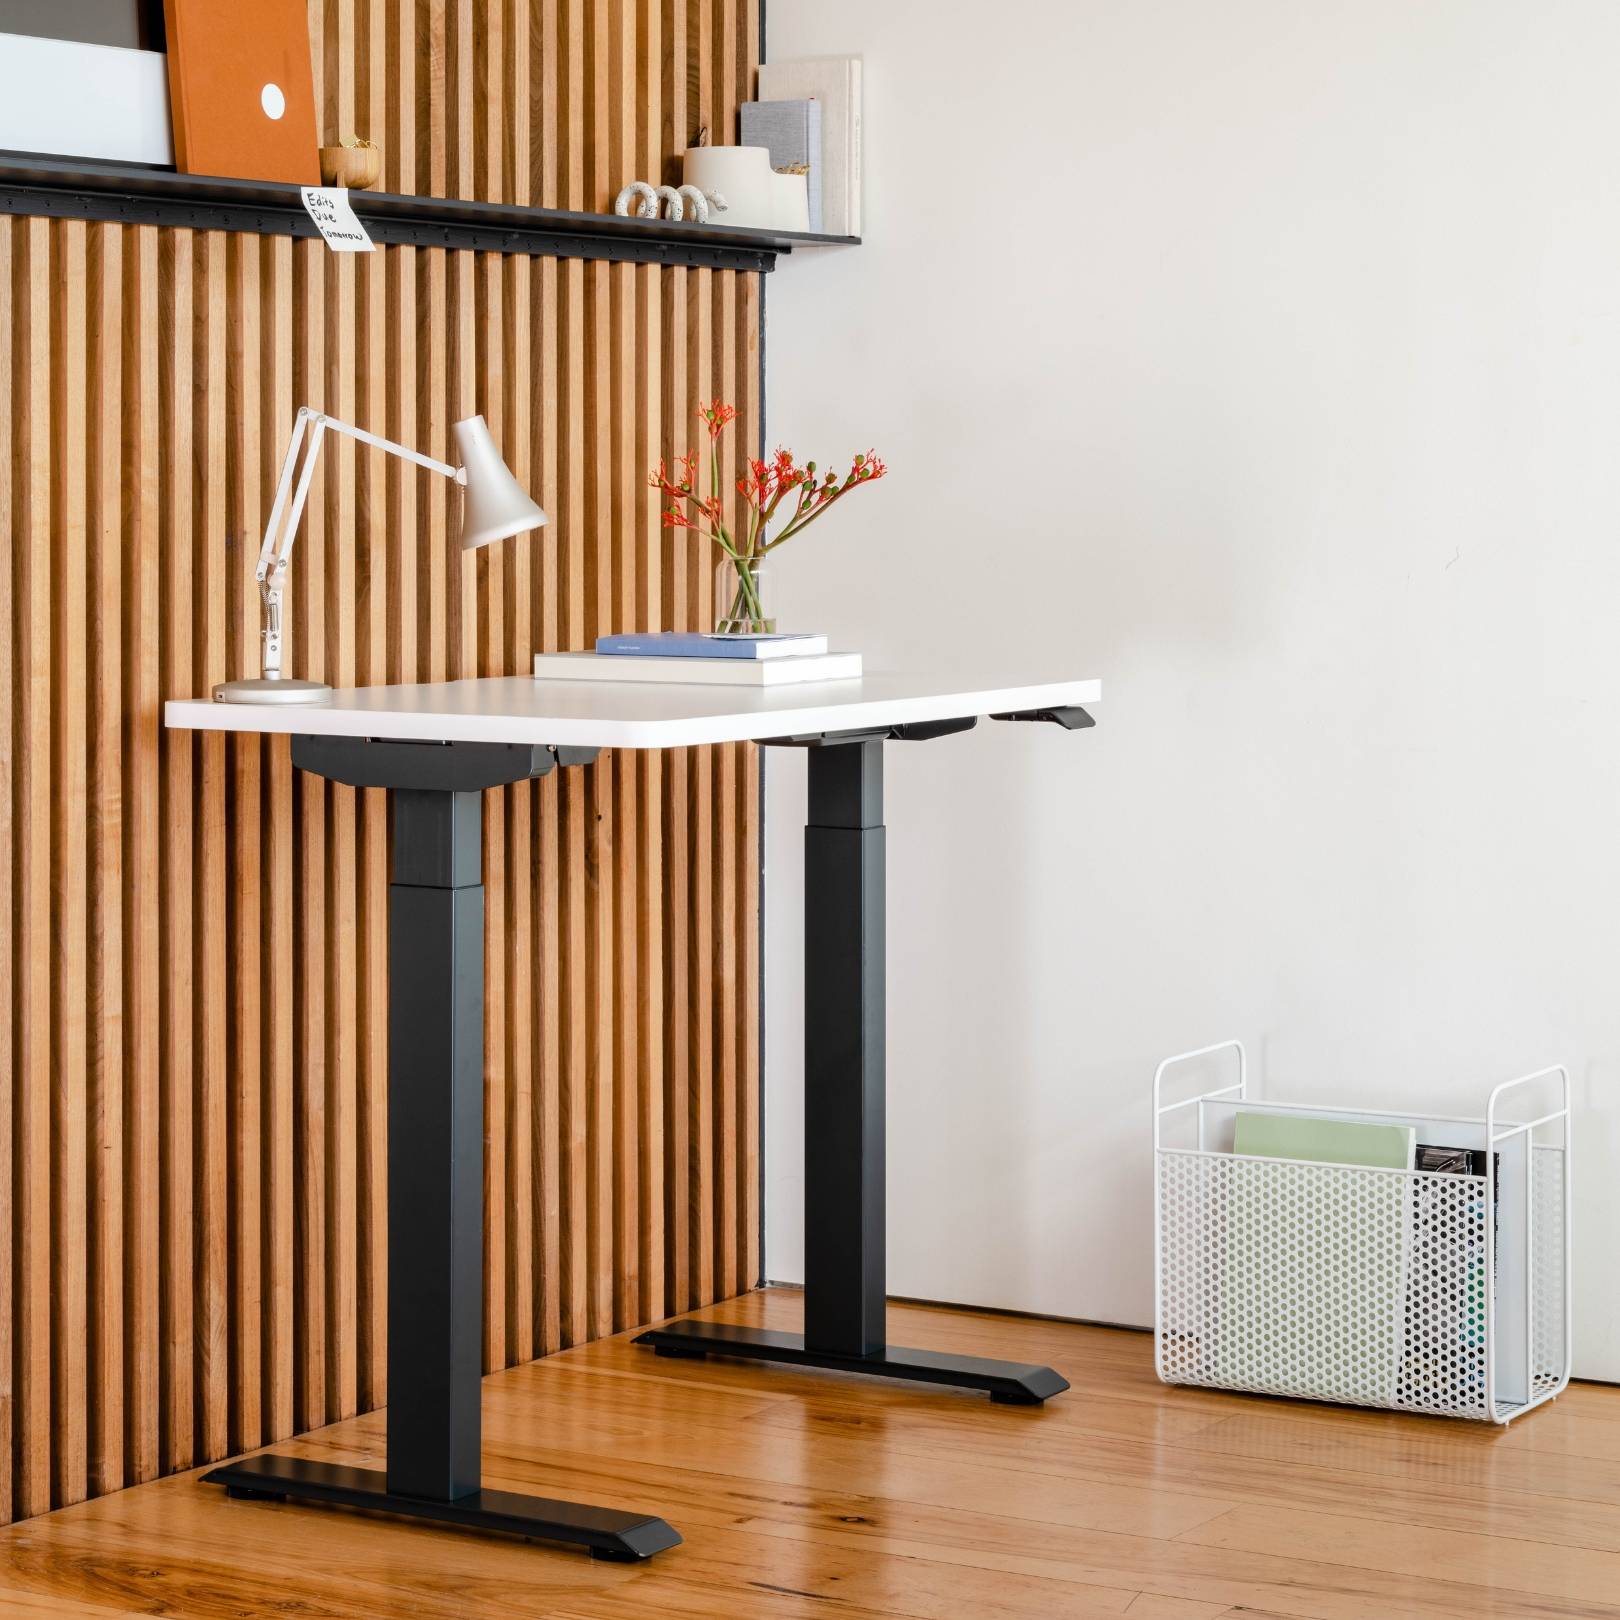 Workplace Ergonomics for Sitting and Stand-Up Desks — In Touch